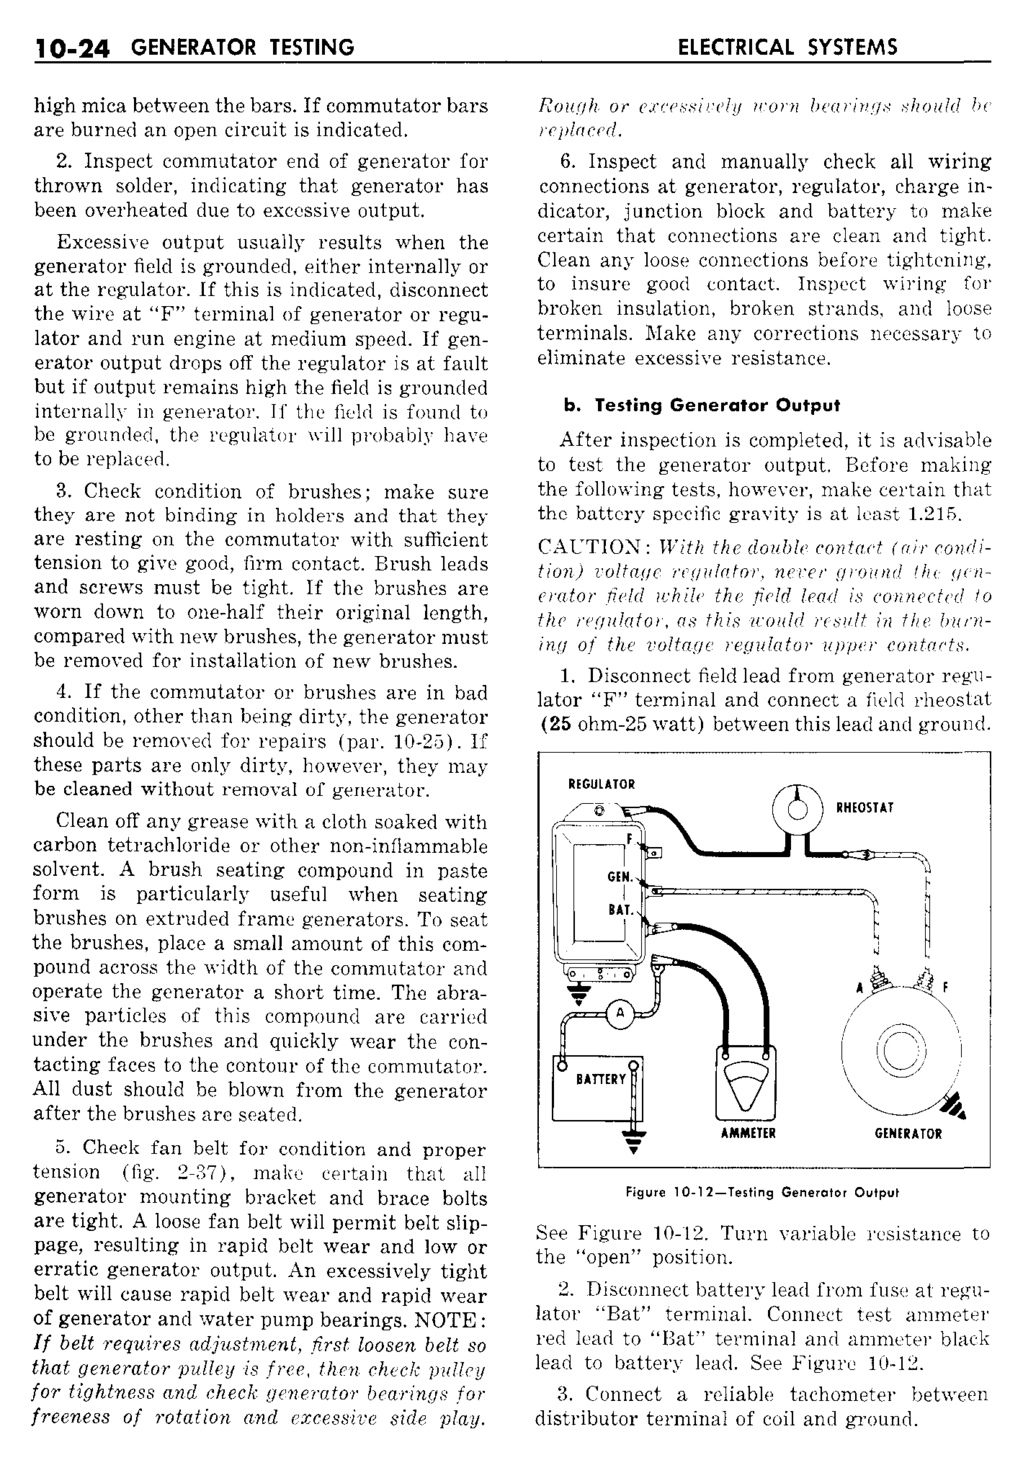 n_11 1959 Buick Shop Manual - Electrical Systems-024-024.jpg